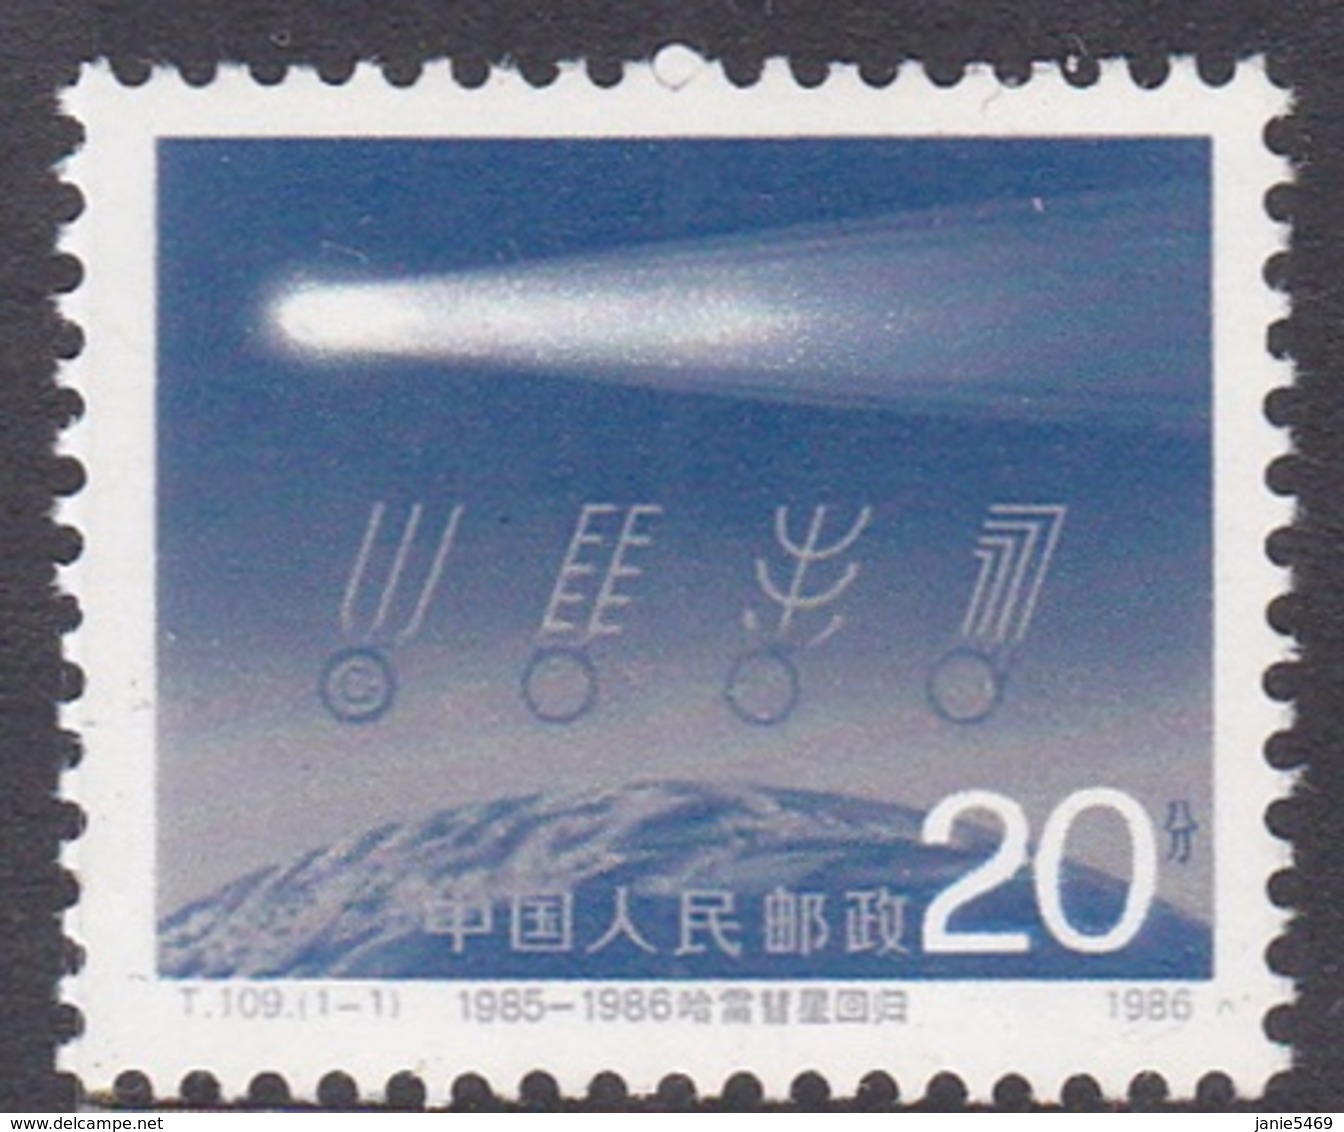 China People's Republic SG 3449 1986 Halley's Comet, Mint Never Hinged - Unused Stamps